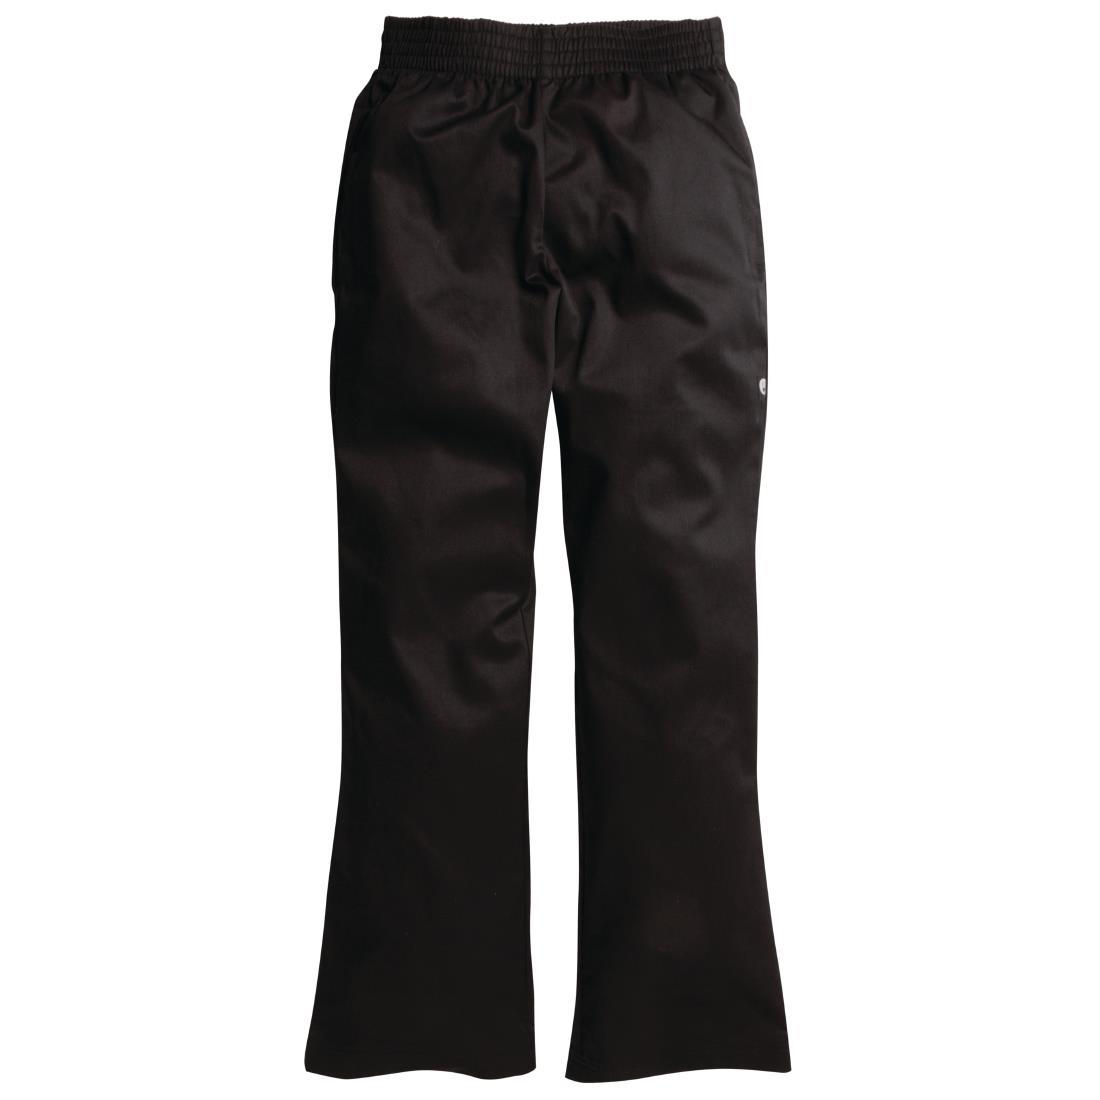 Chef Works Womens Basic Baggy Chefs Trousers Black XS - B223-XS  - 2